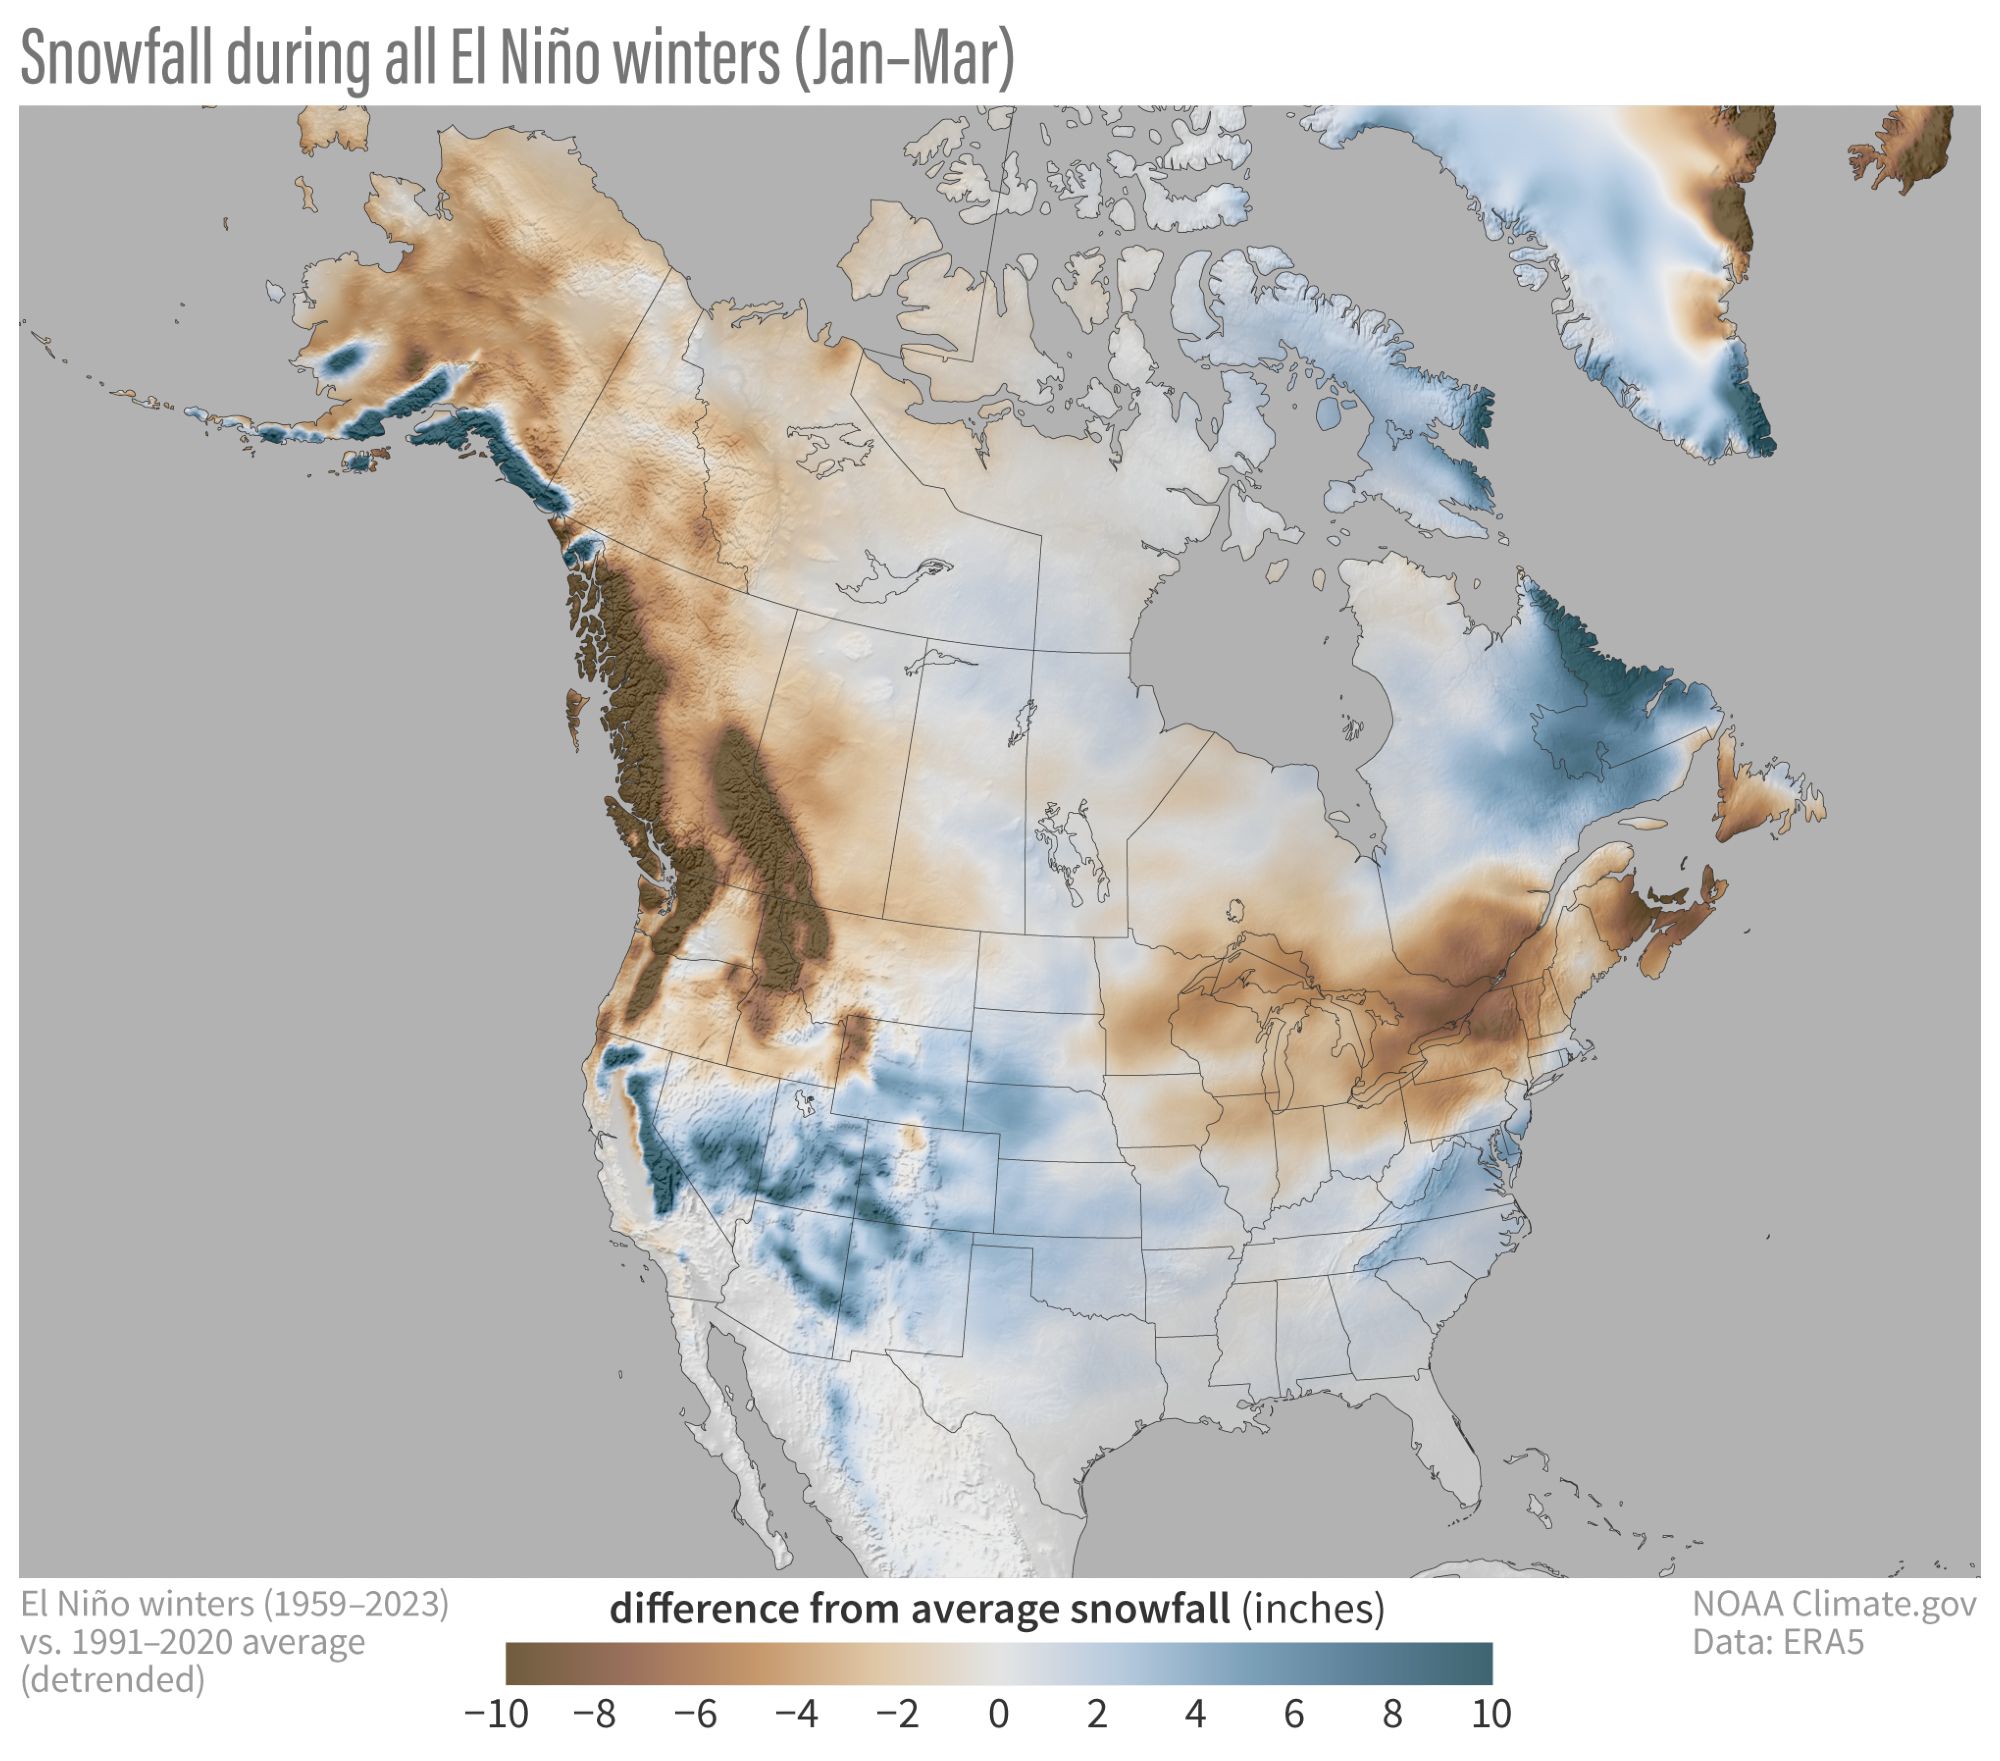 Are you ready for El Niño (Jan - Mar) Test-map-avg-snowfall-anom-el-nino-winters-moderate-to-strong-jfm-2000-2